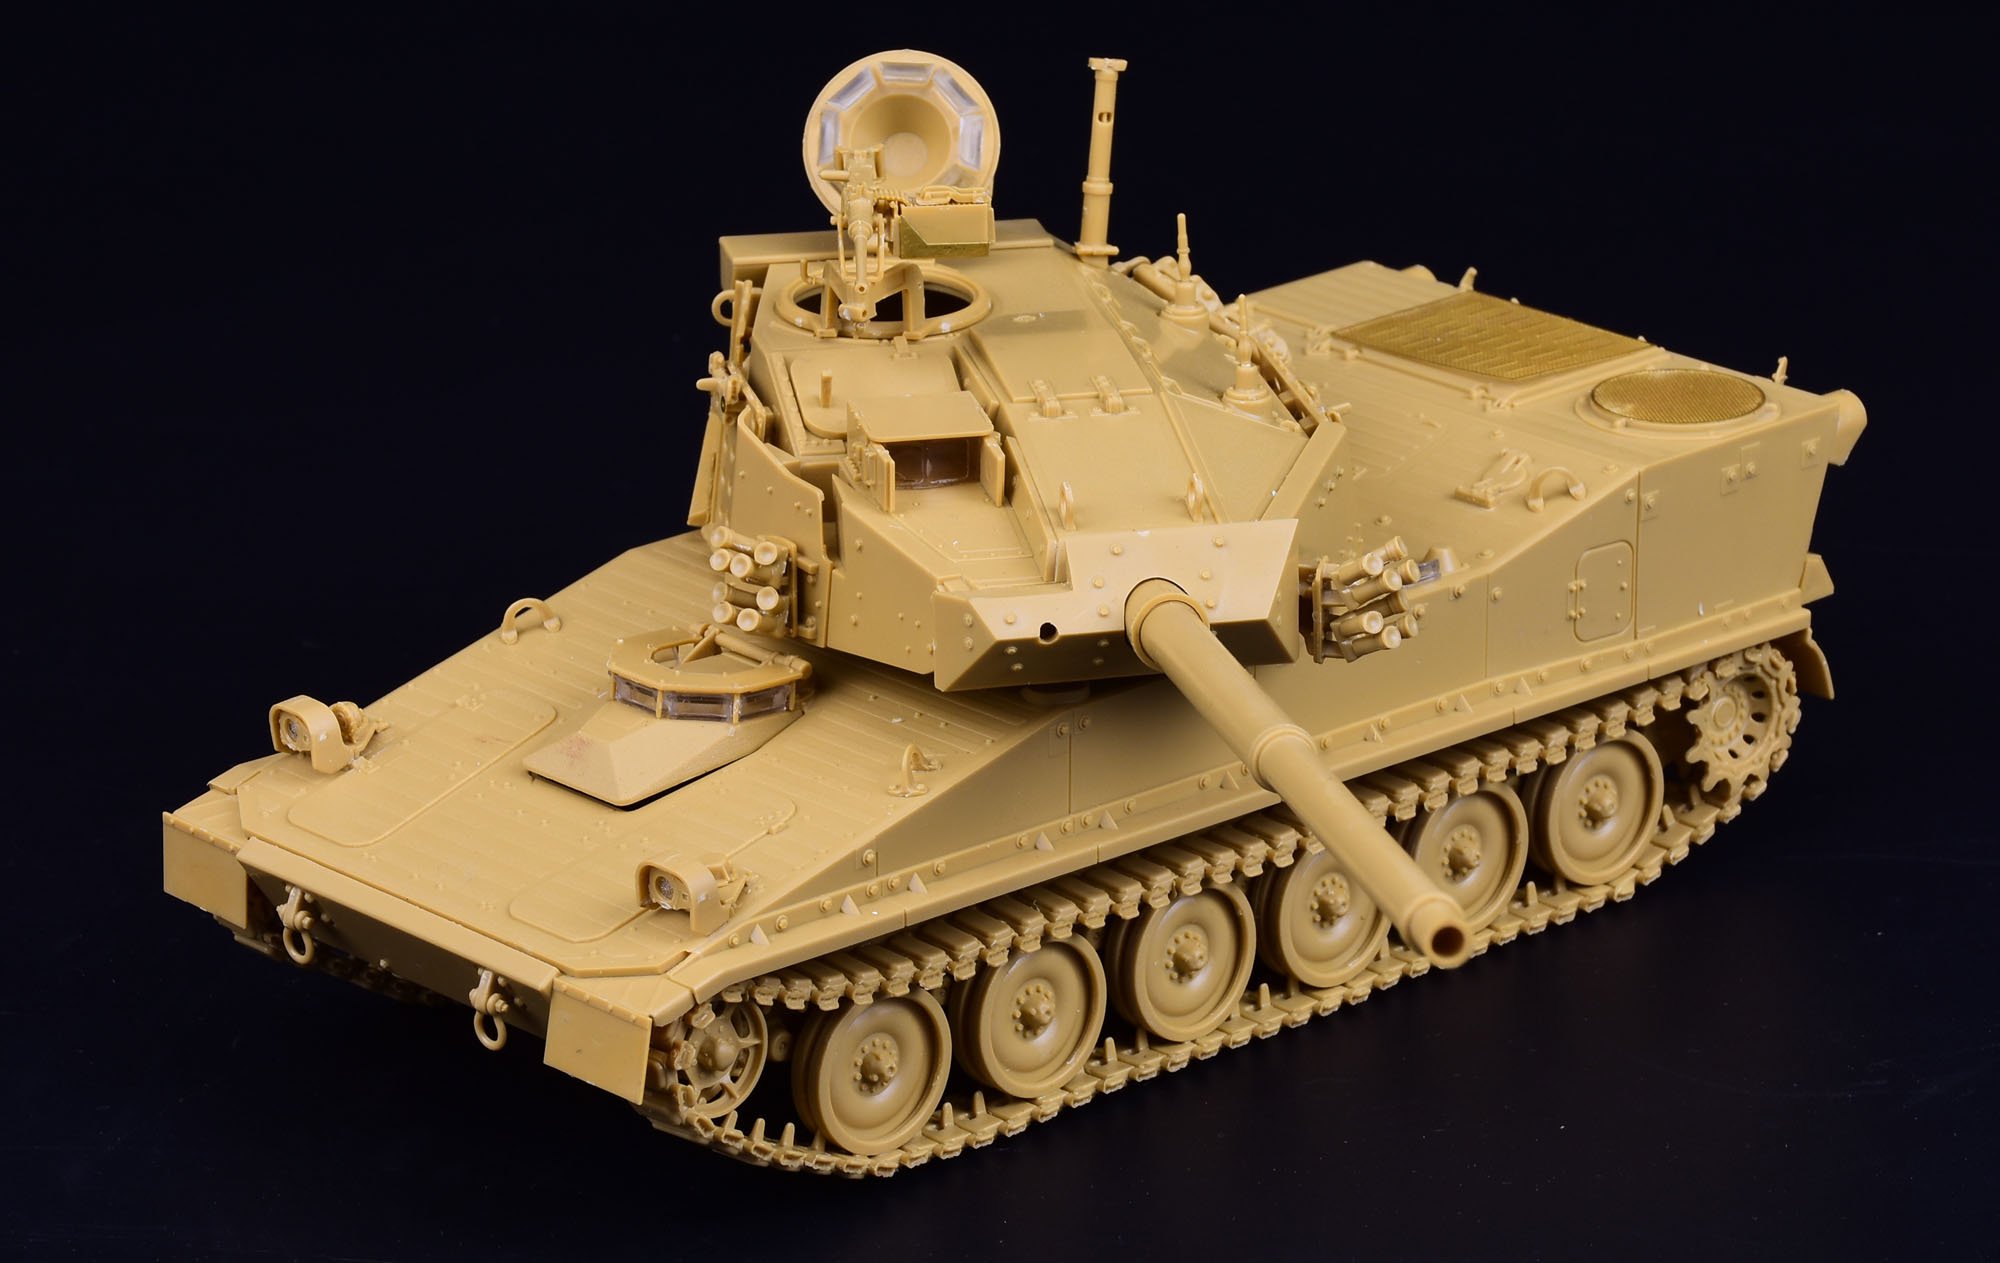 1/35 M8 Armored Gun System - Click Image to Close